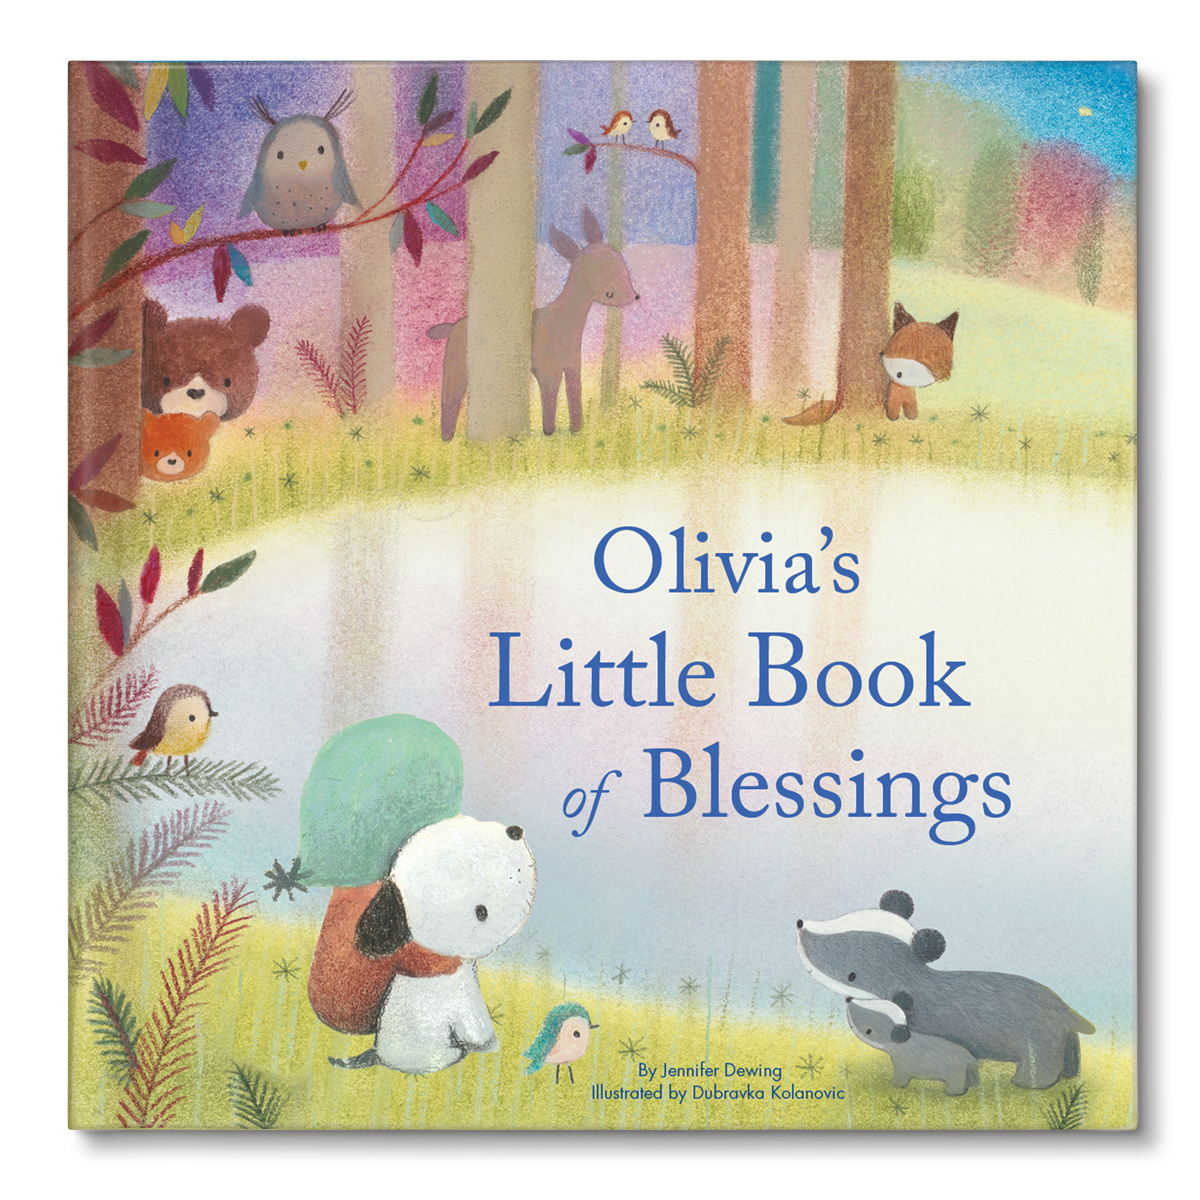 Children’s personalized bookseller ISeeMe.com introduces "My Little Book of Blessings" for Easter.